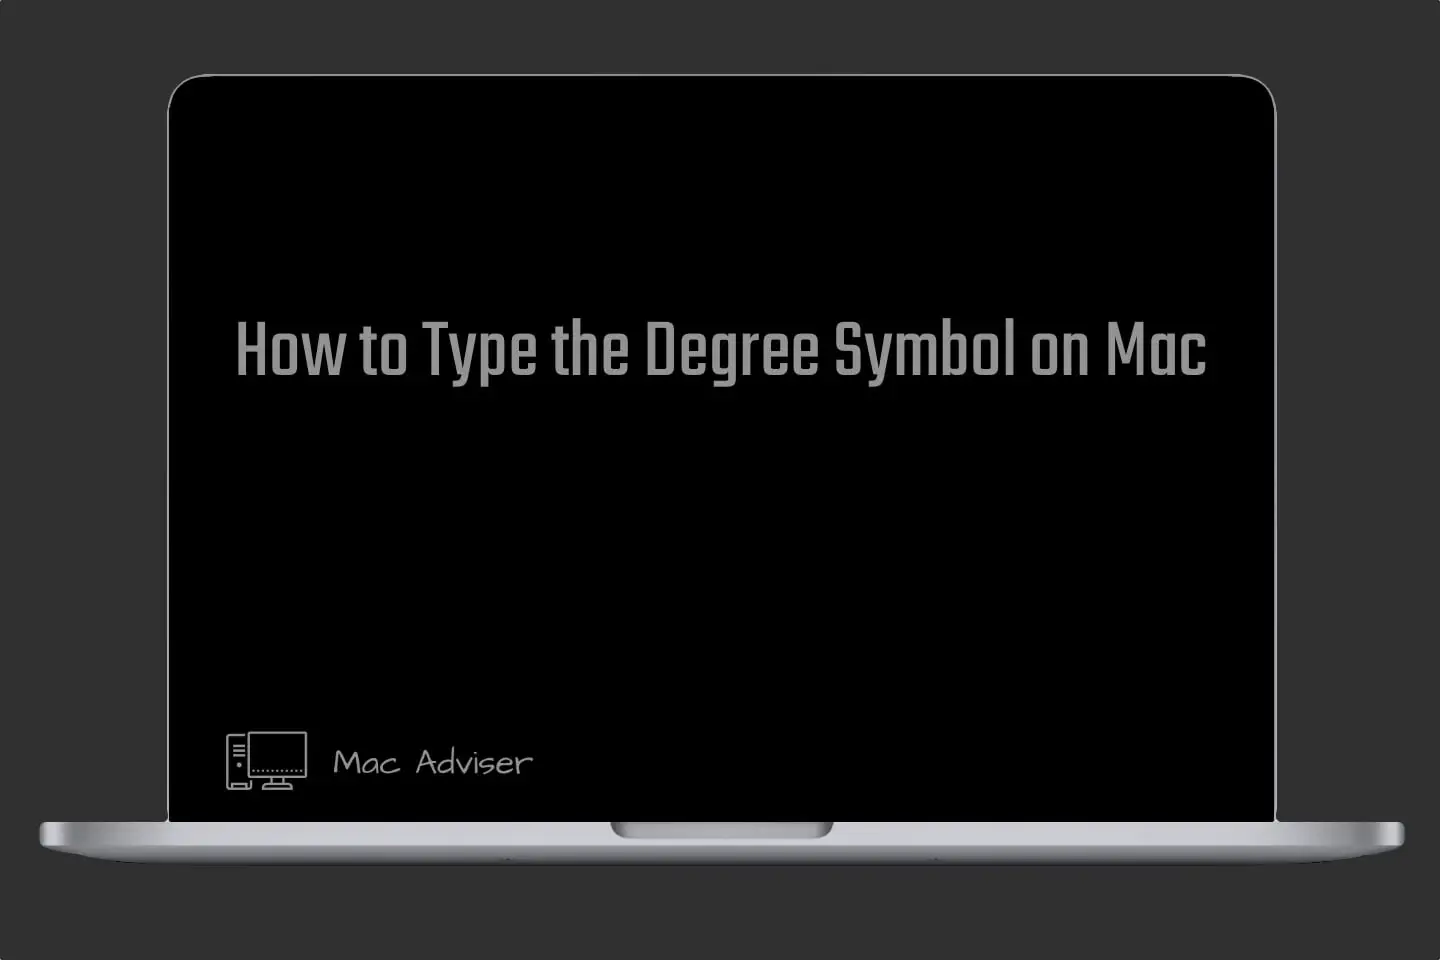 How to Type the Degree Symbol on Mac